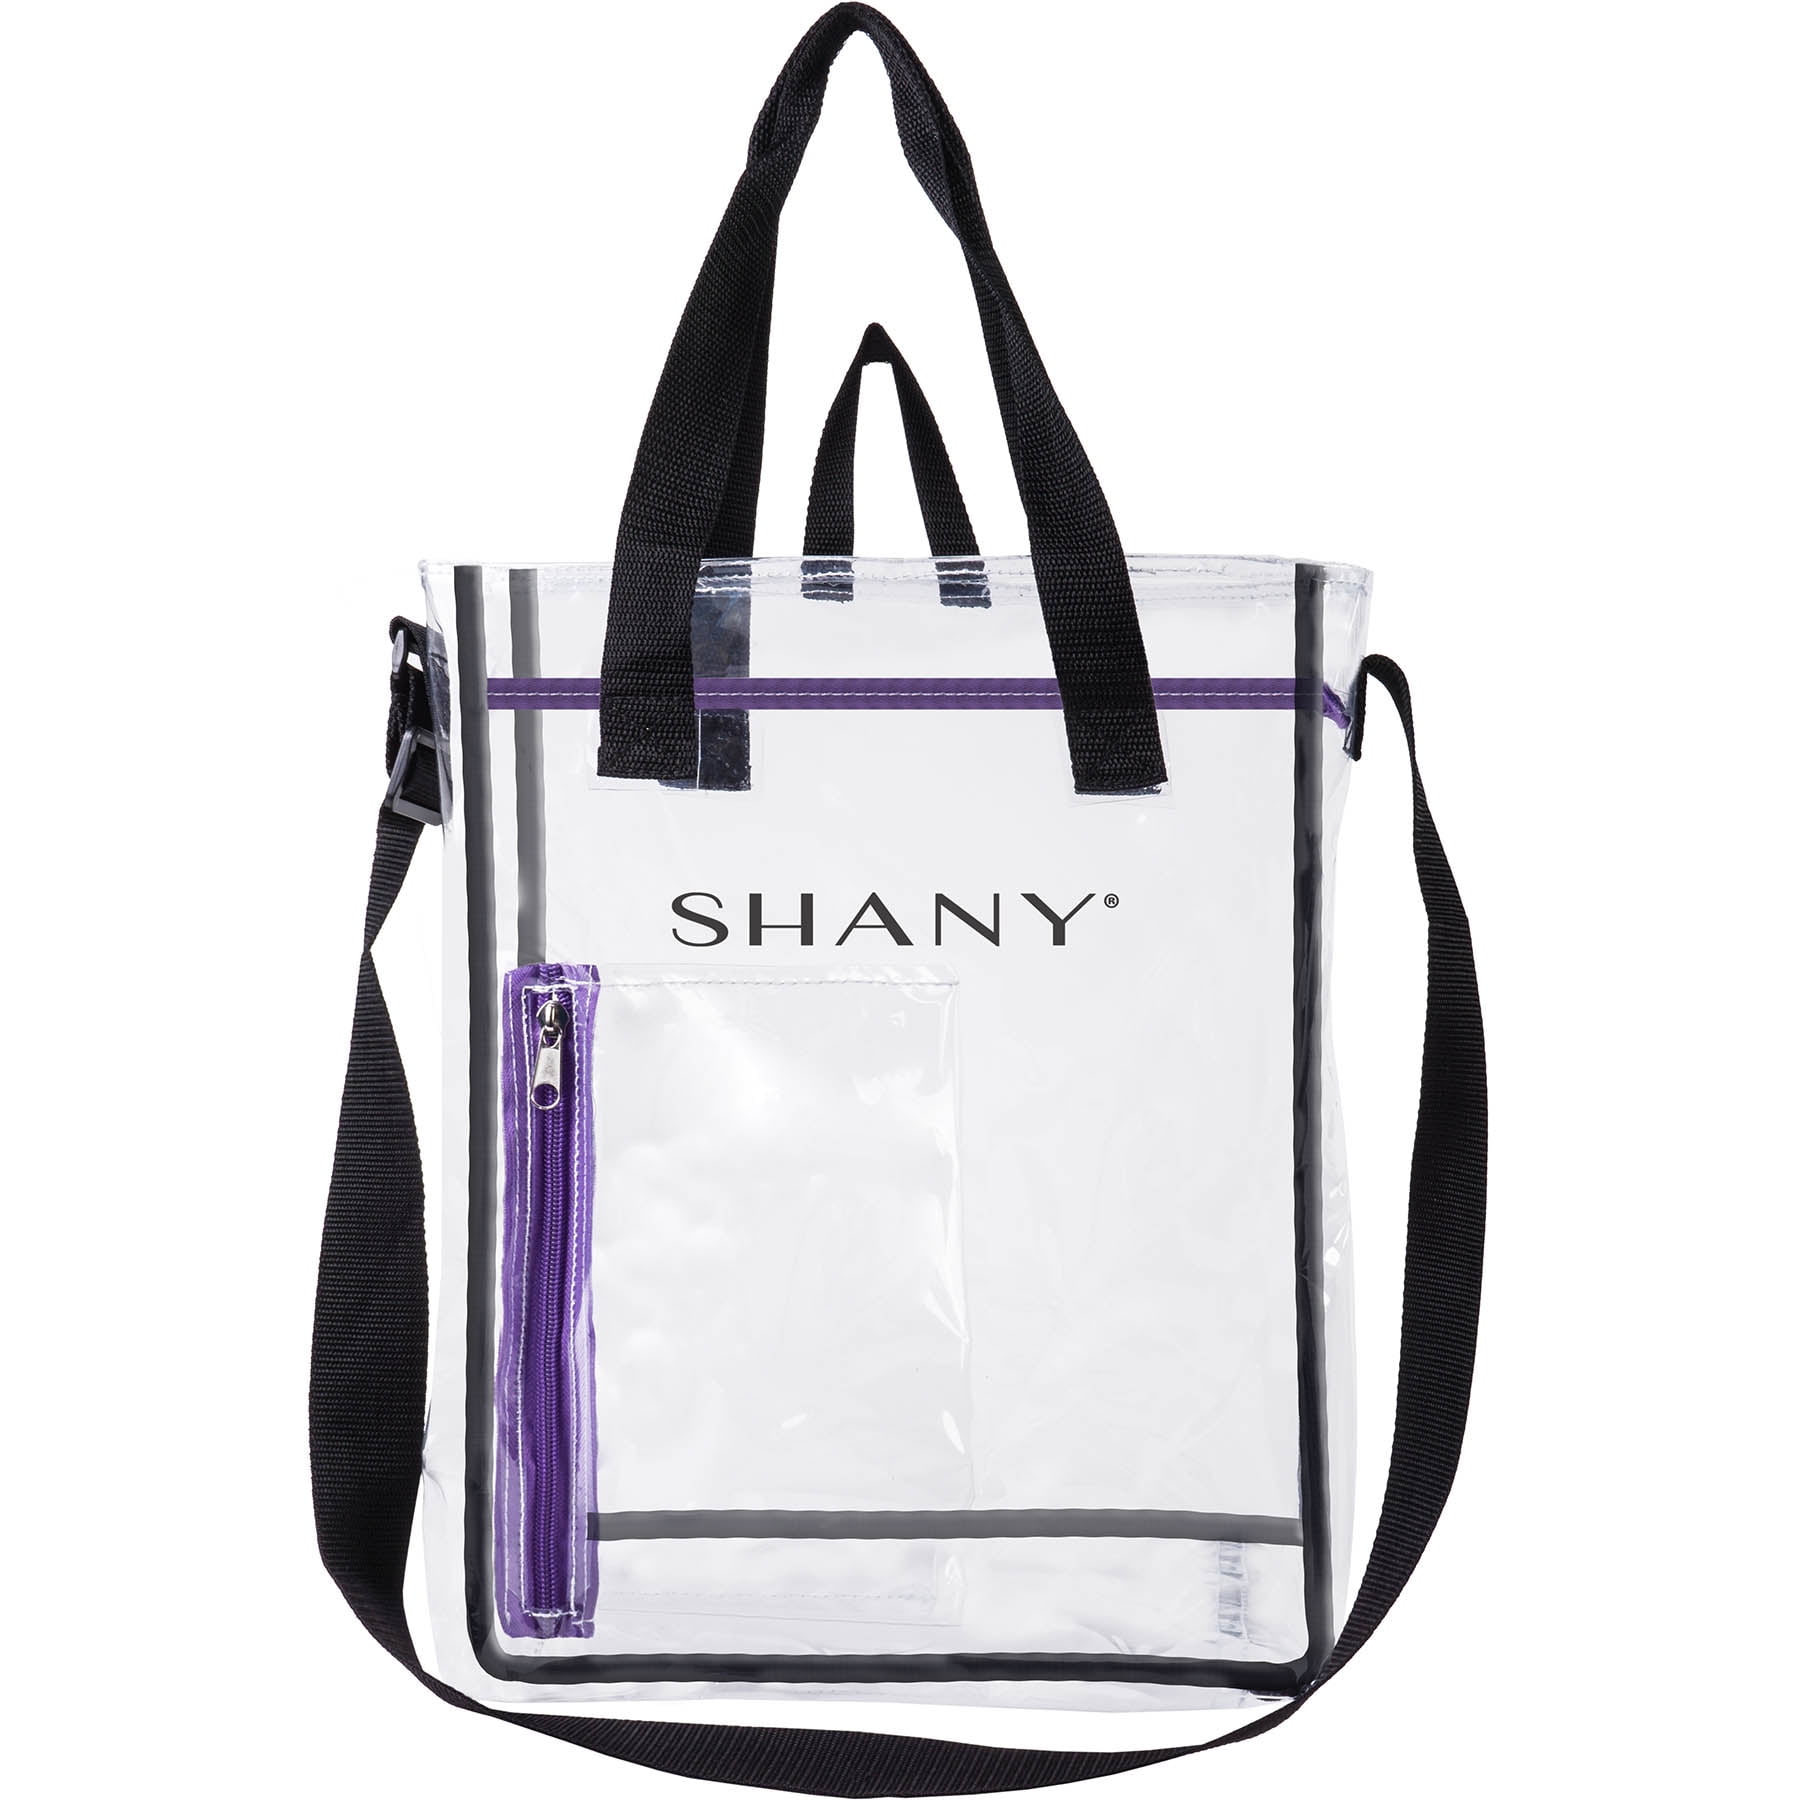 SHANY Clear Toiletry and Makeup Carry-On Travel Bag â€“ Large Multiple  Handle, Two-Tone Tote with Purple Front Zippered Pocket 